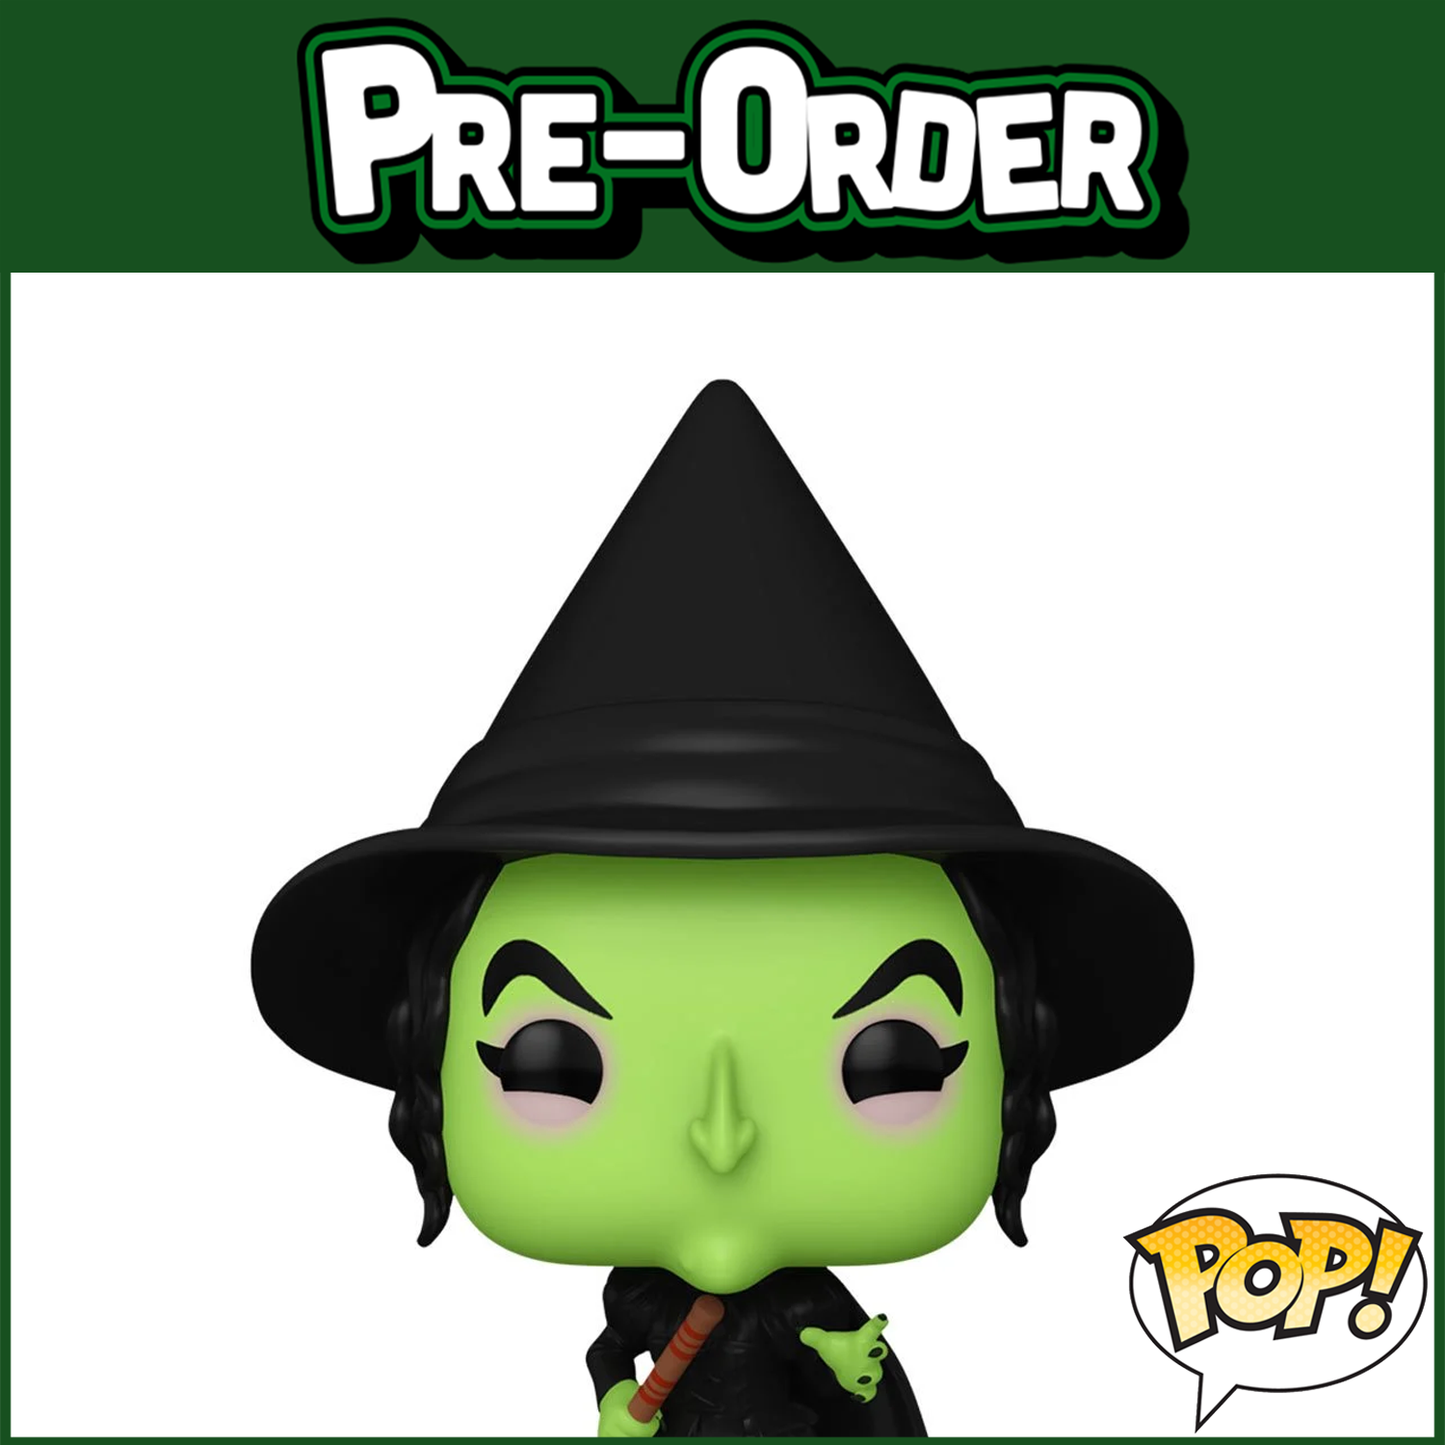 (PRE-ORDER) Funko POP! Movies: The Wizard of Oz 85th - Wicked Witch #1519